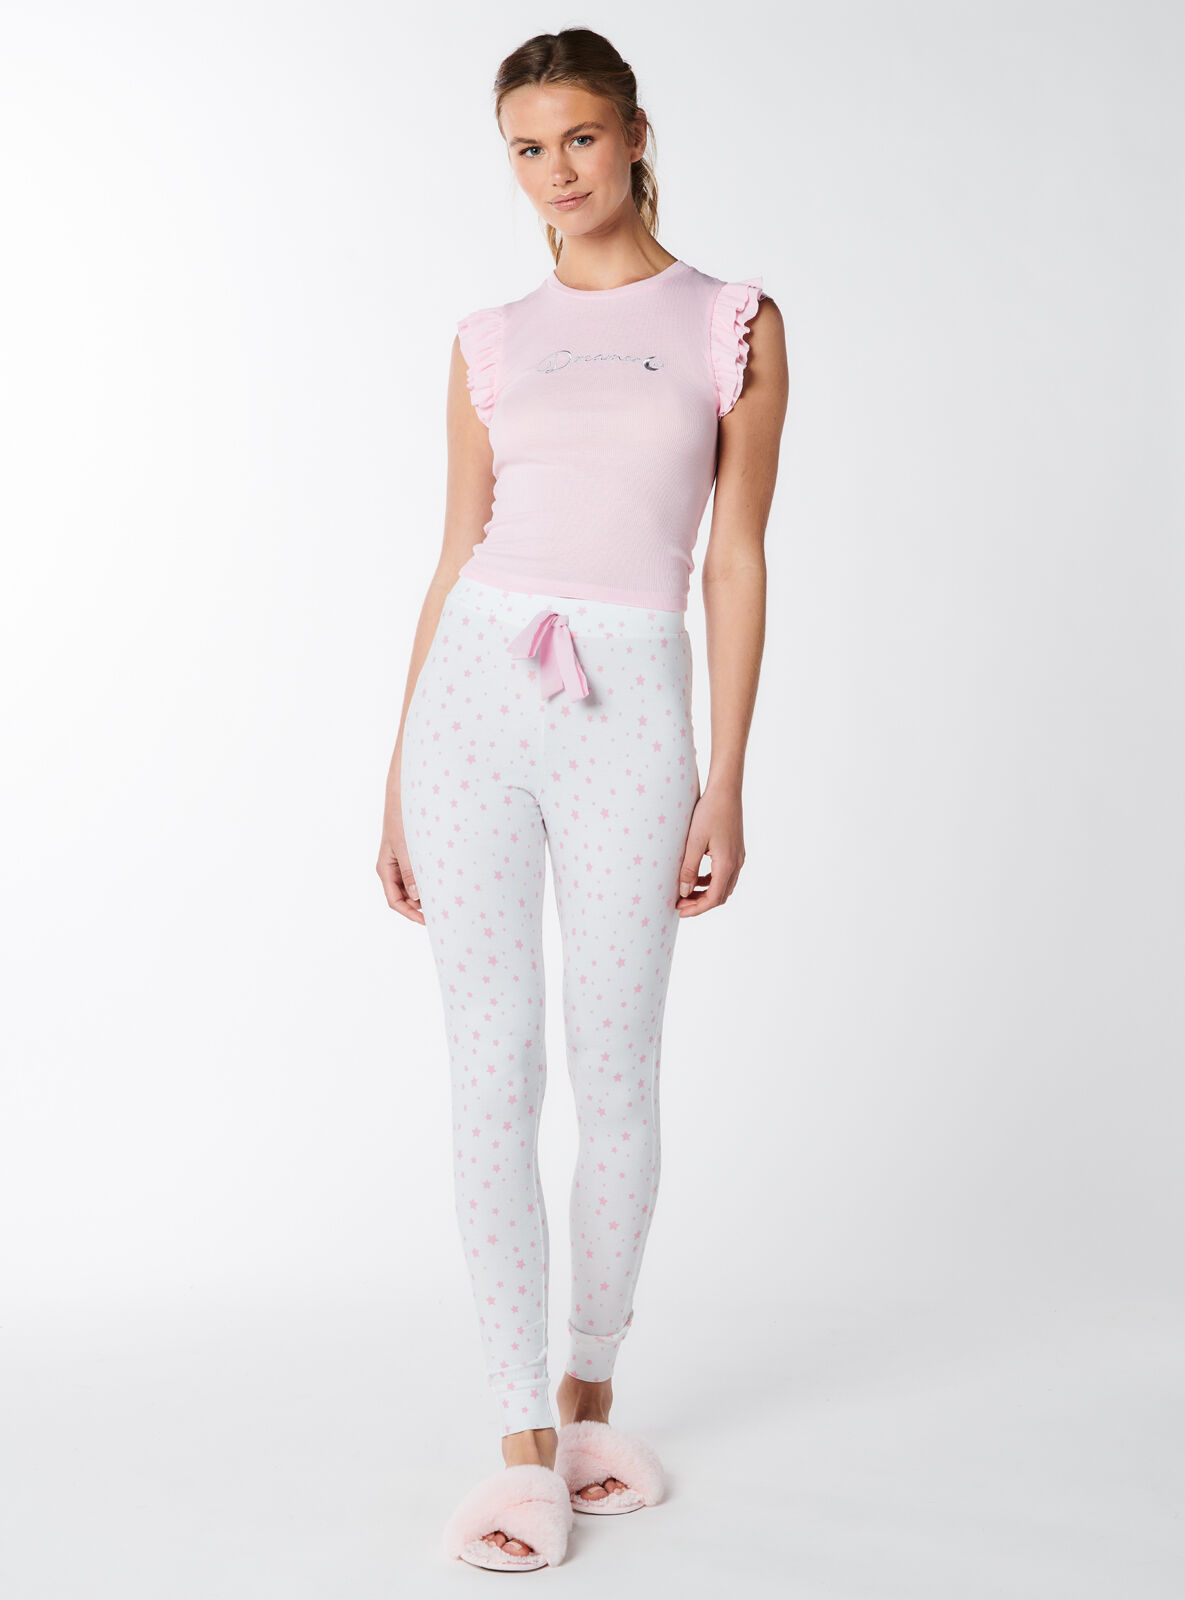 Boux Avenue Dreamer frill tee and leggings set - Pink Mix - 12